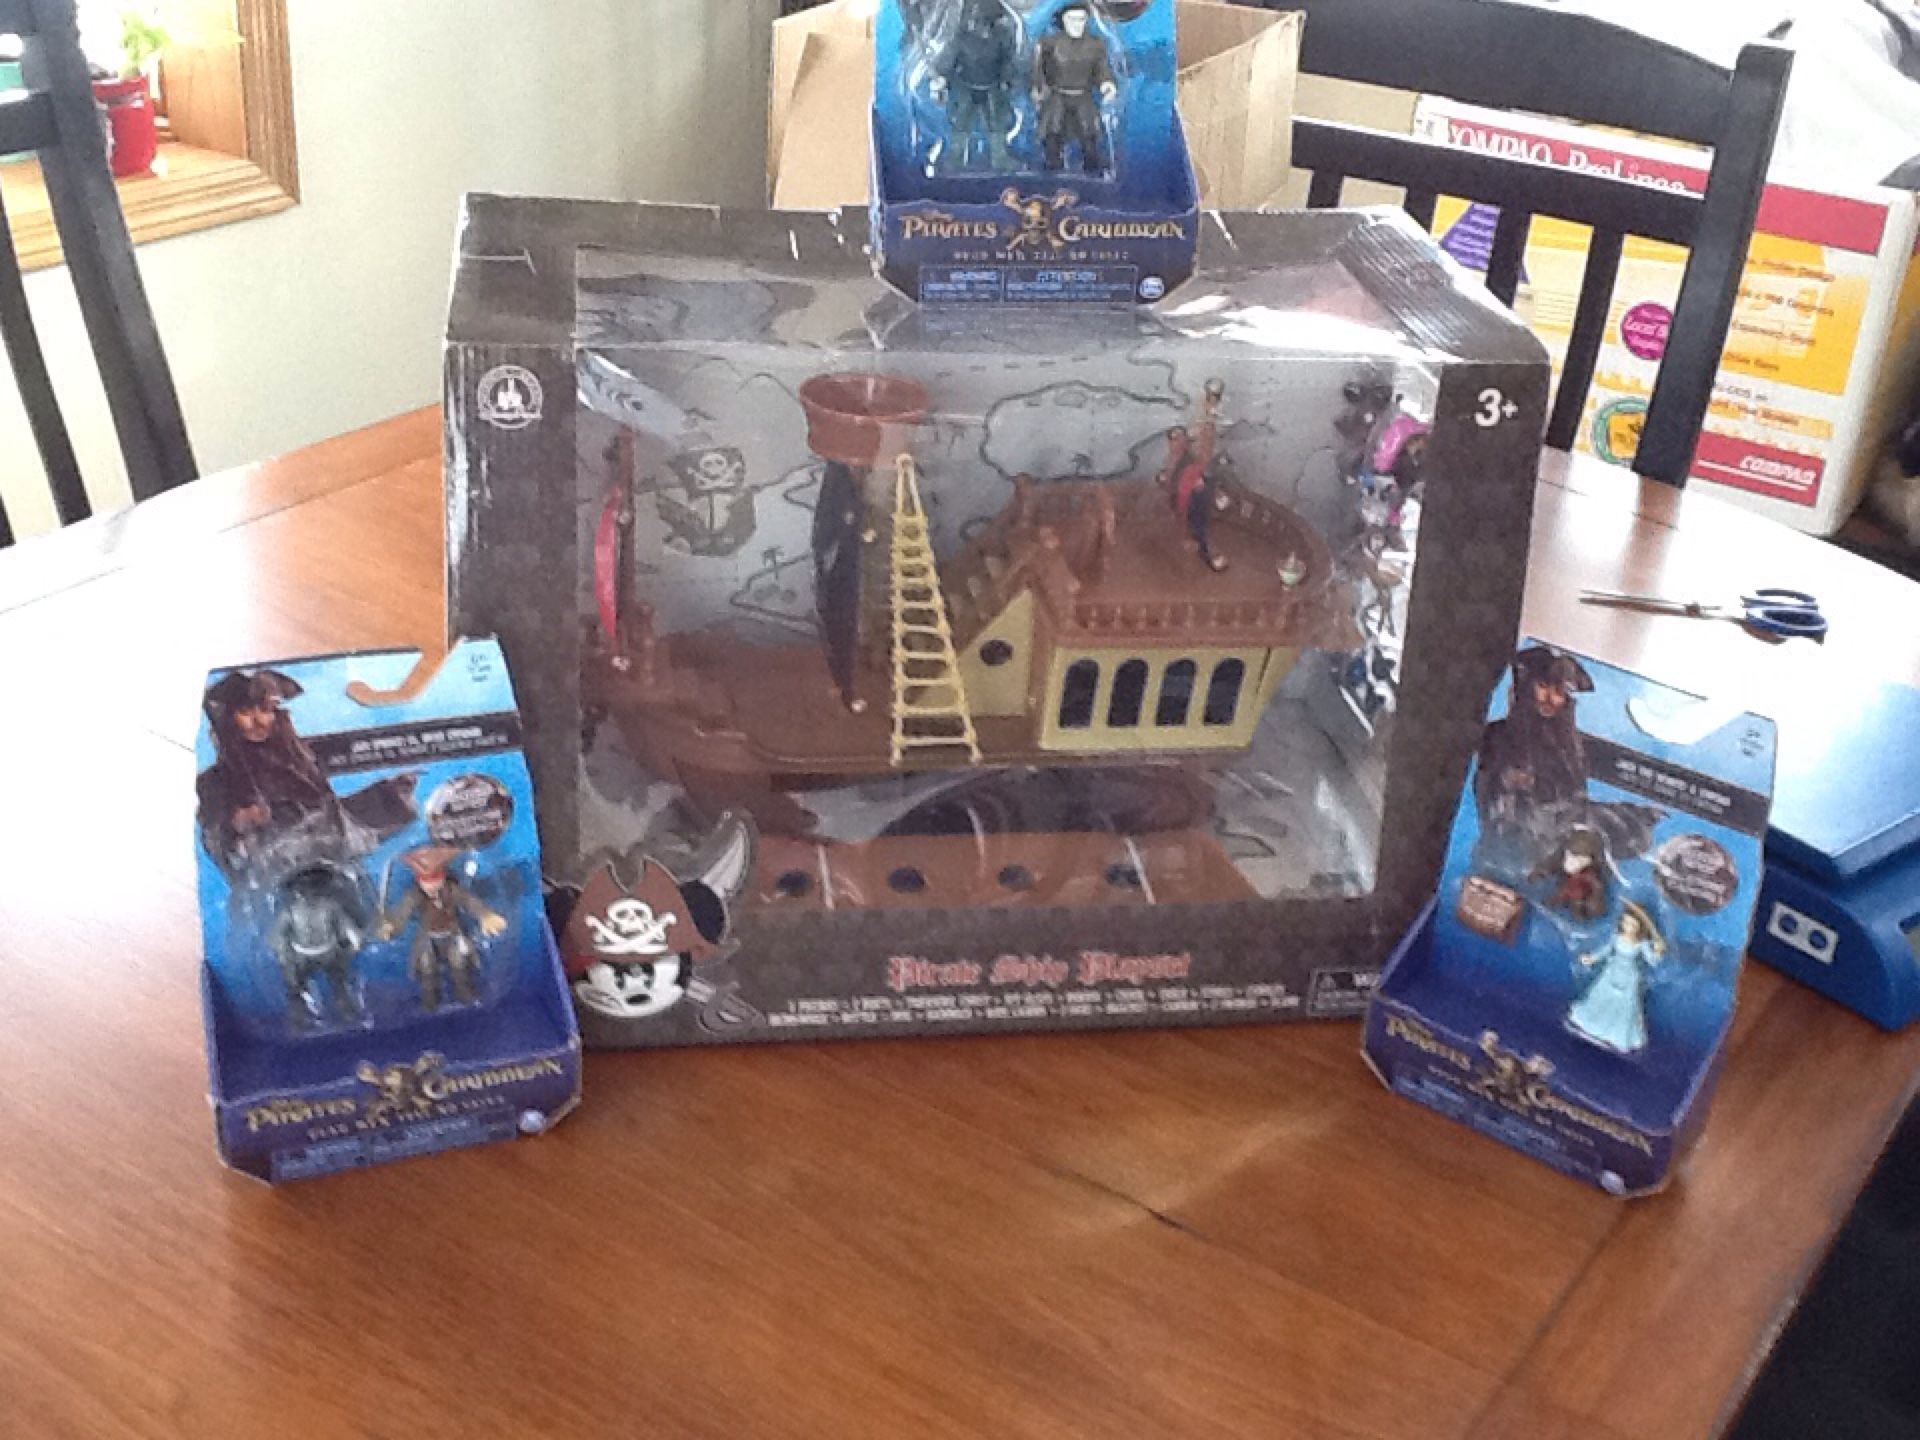 NIB:DISNEY "Pirates of the Caribbean" pirate ship playset AND 3 extra character sets from "Pirates of the Caribbean - DEAD MEN TELL NO TALES"